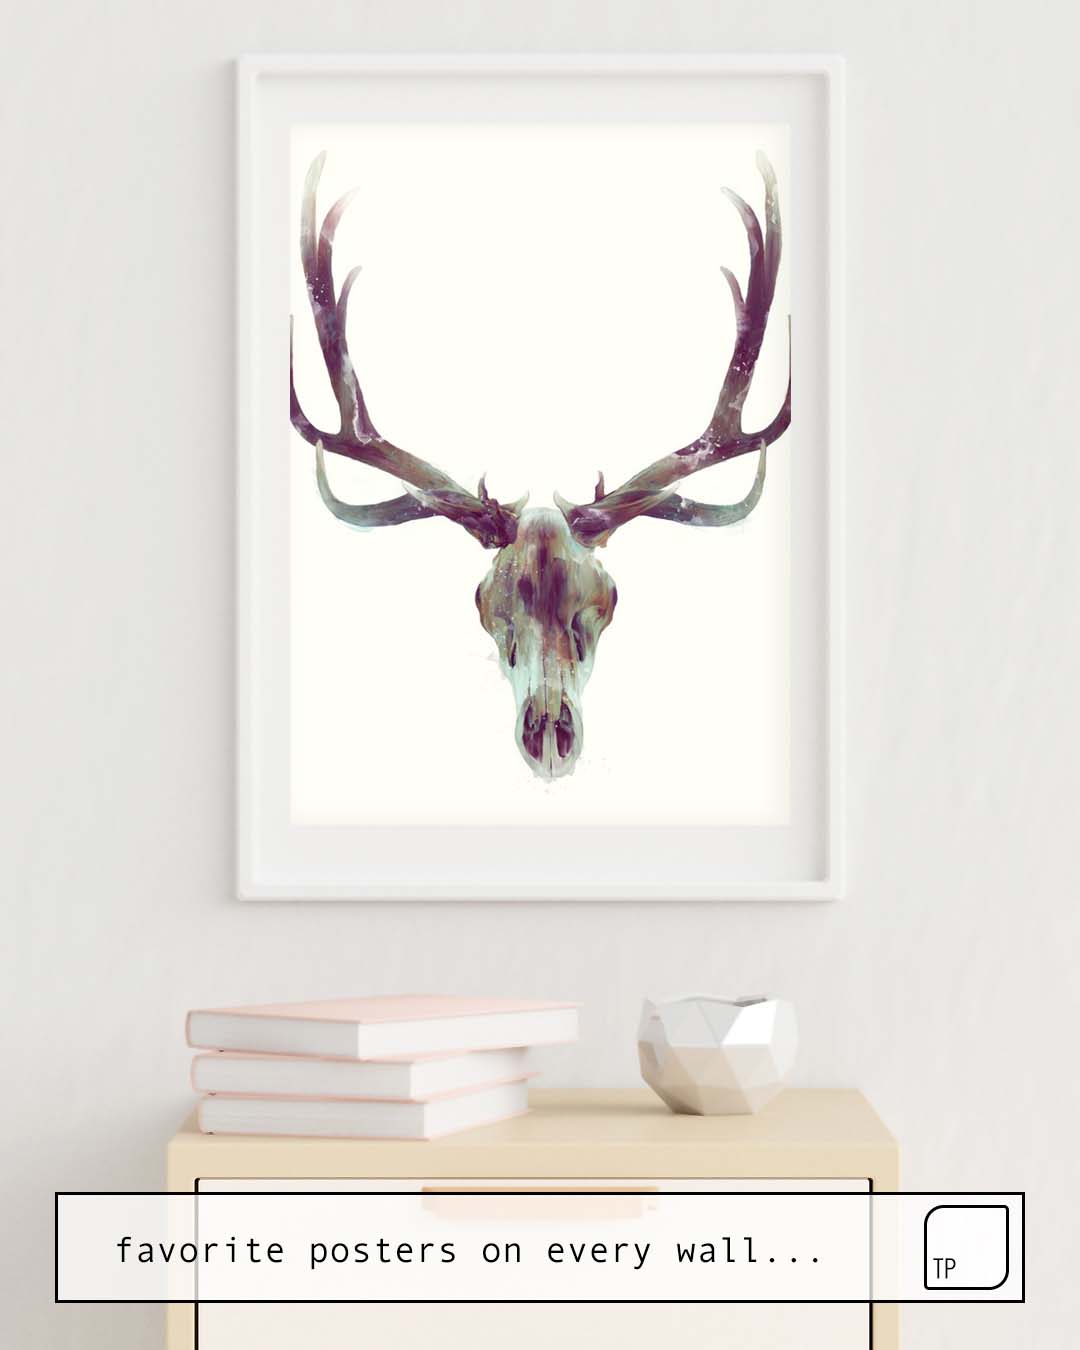 The photo shows an example of furnishing with the motif ELK SKULL by Amy Hamilton as mural